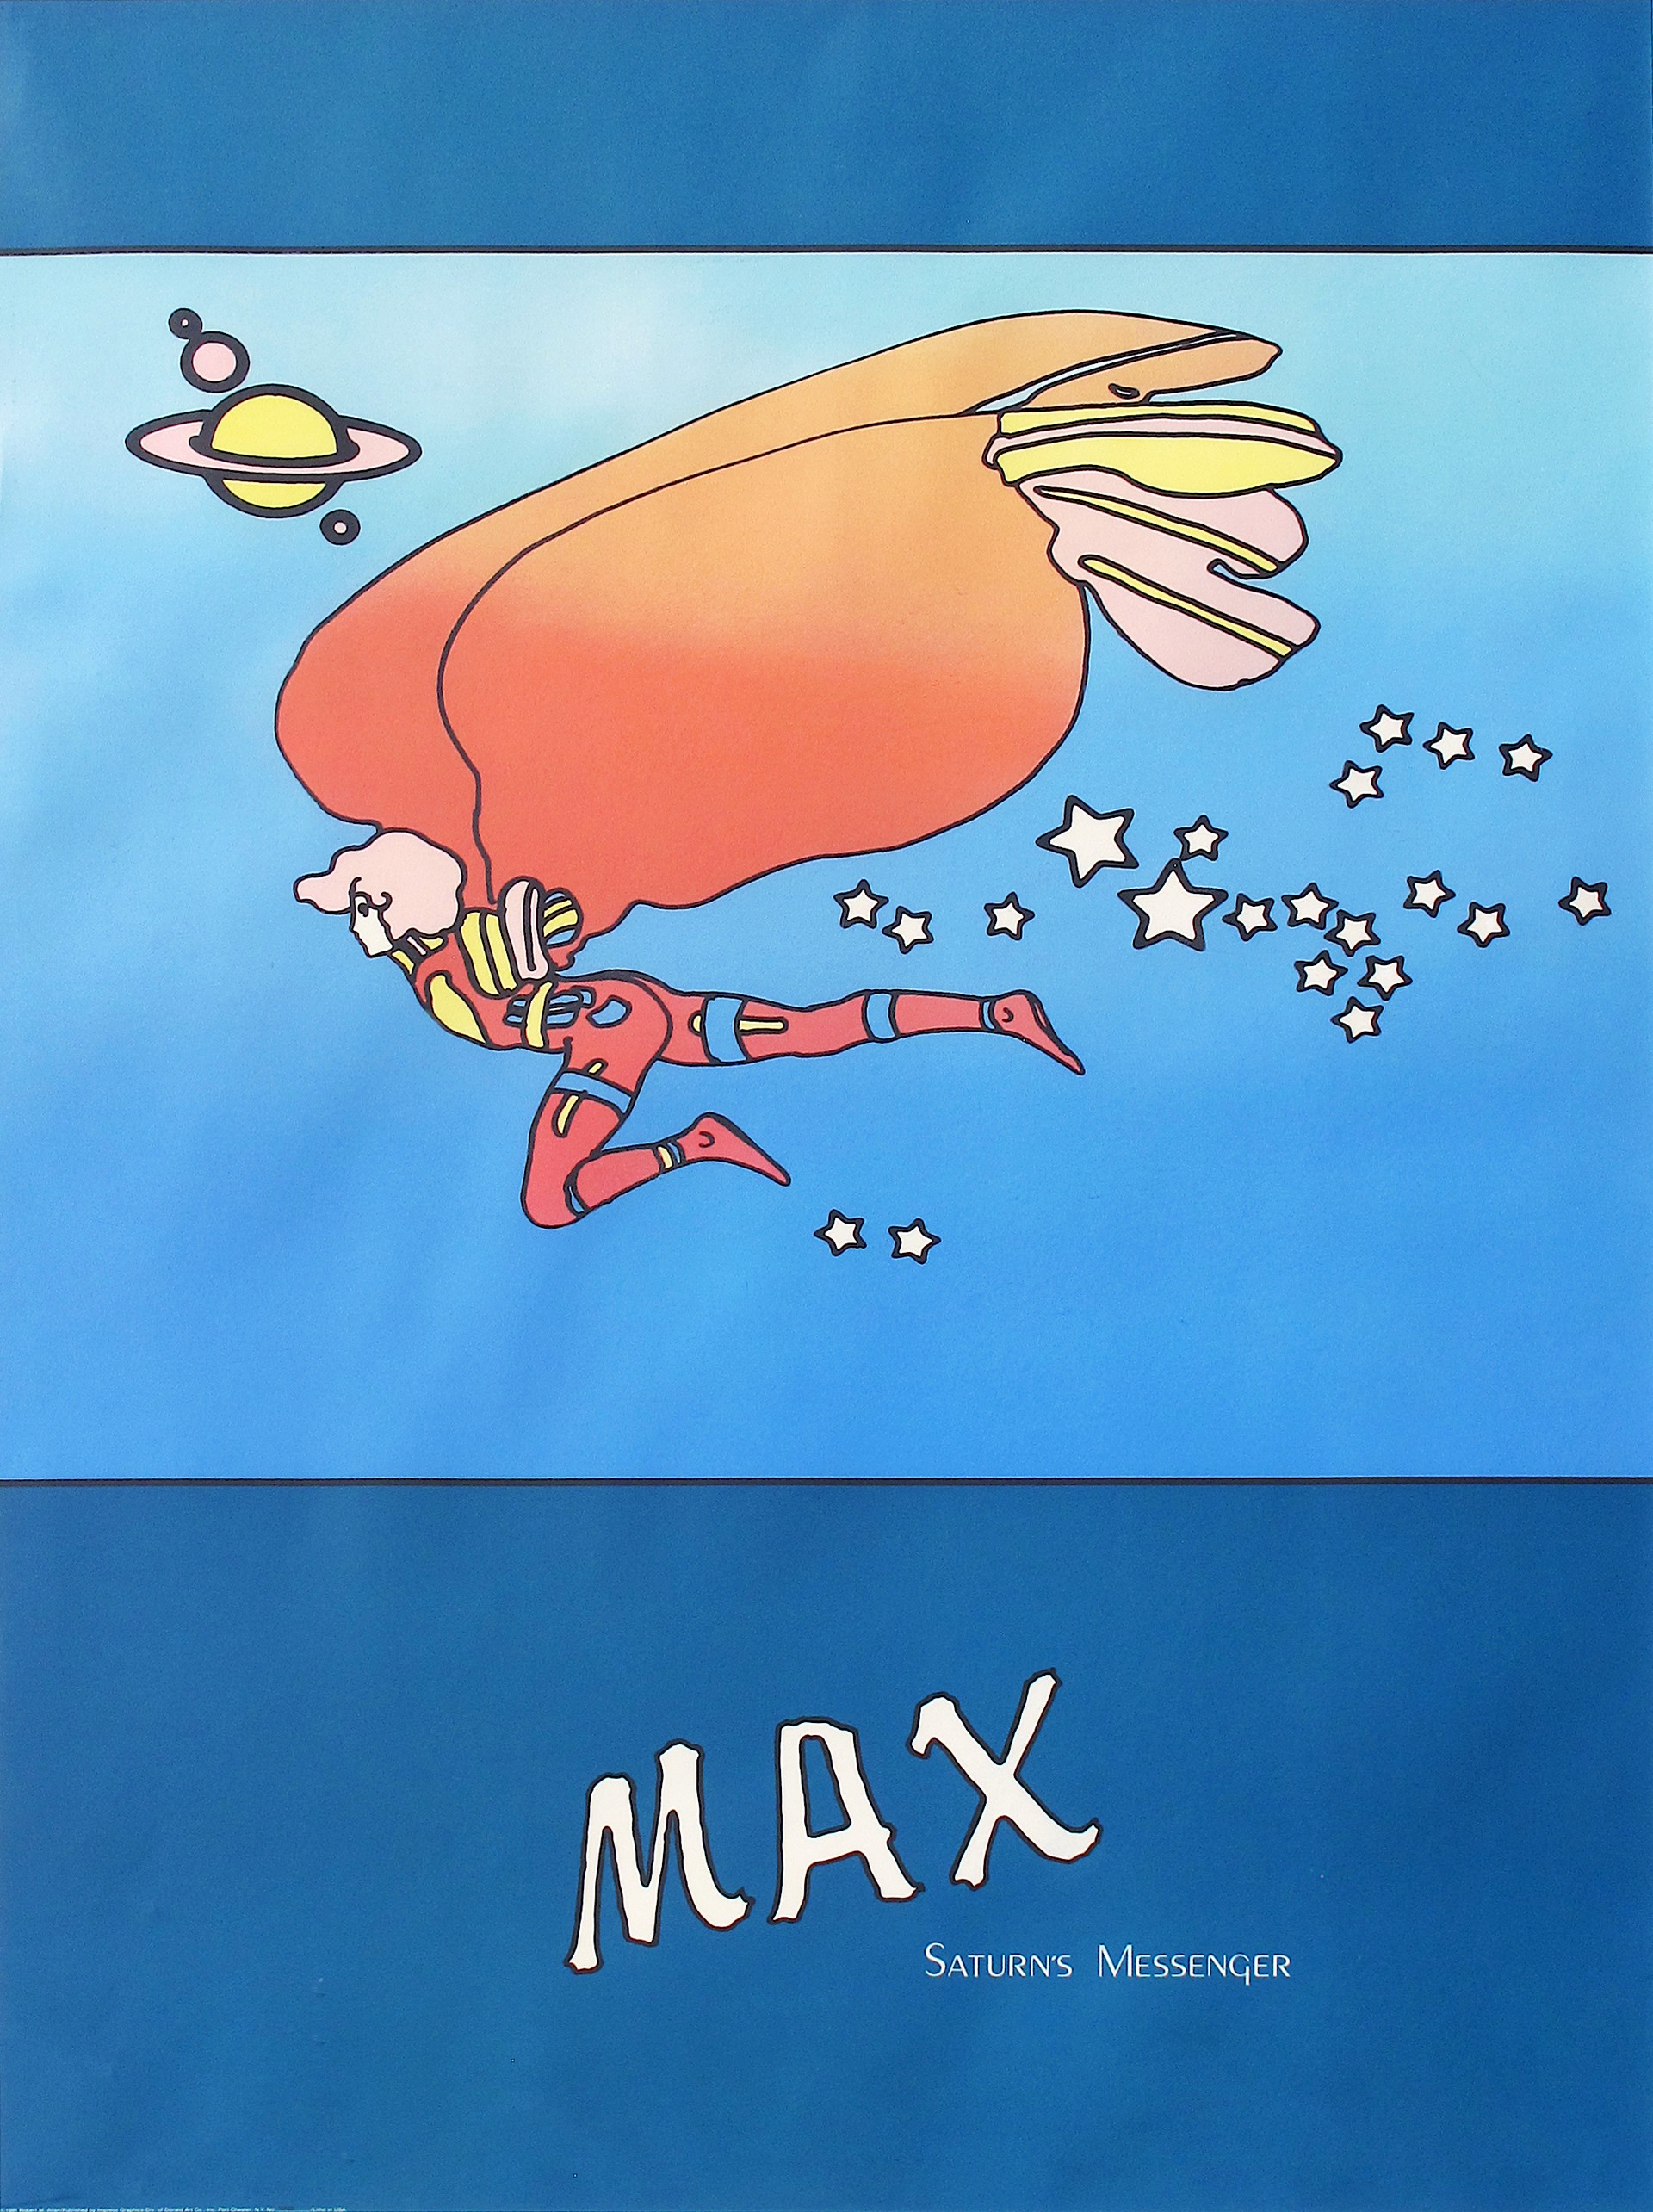 Saturn's Messenger by Peter Max